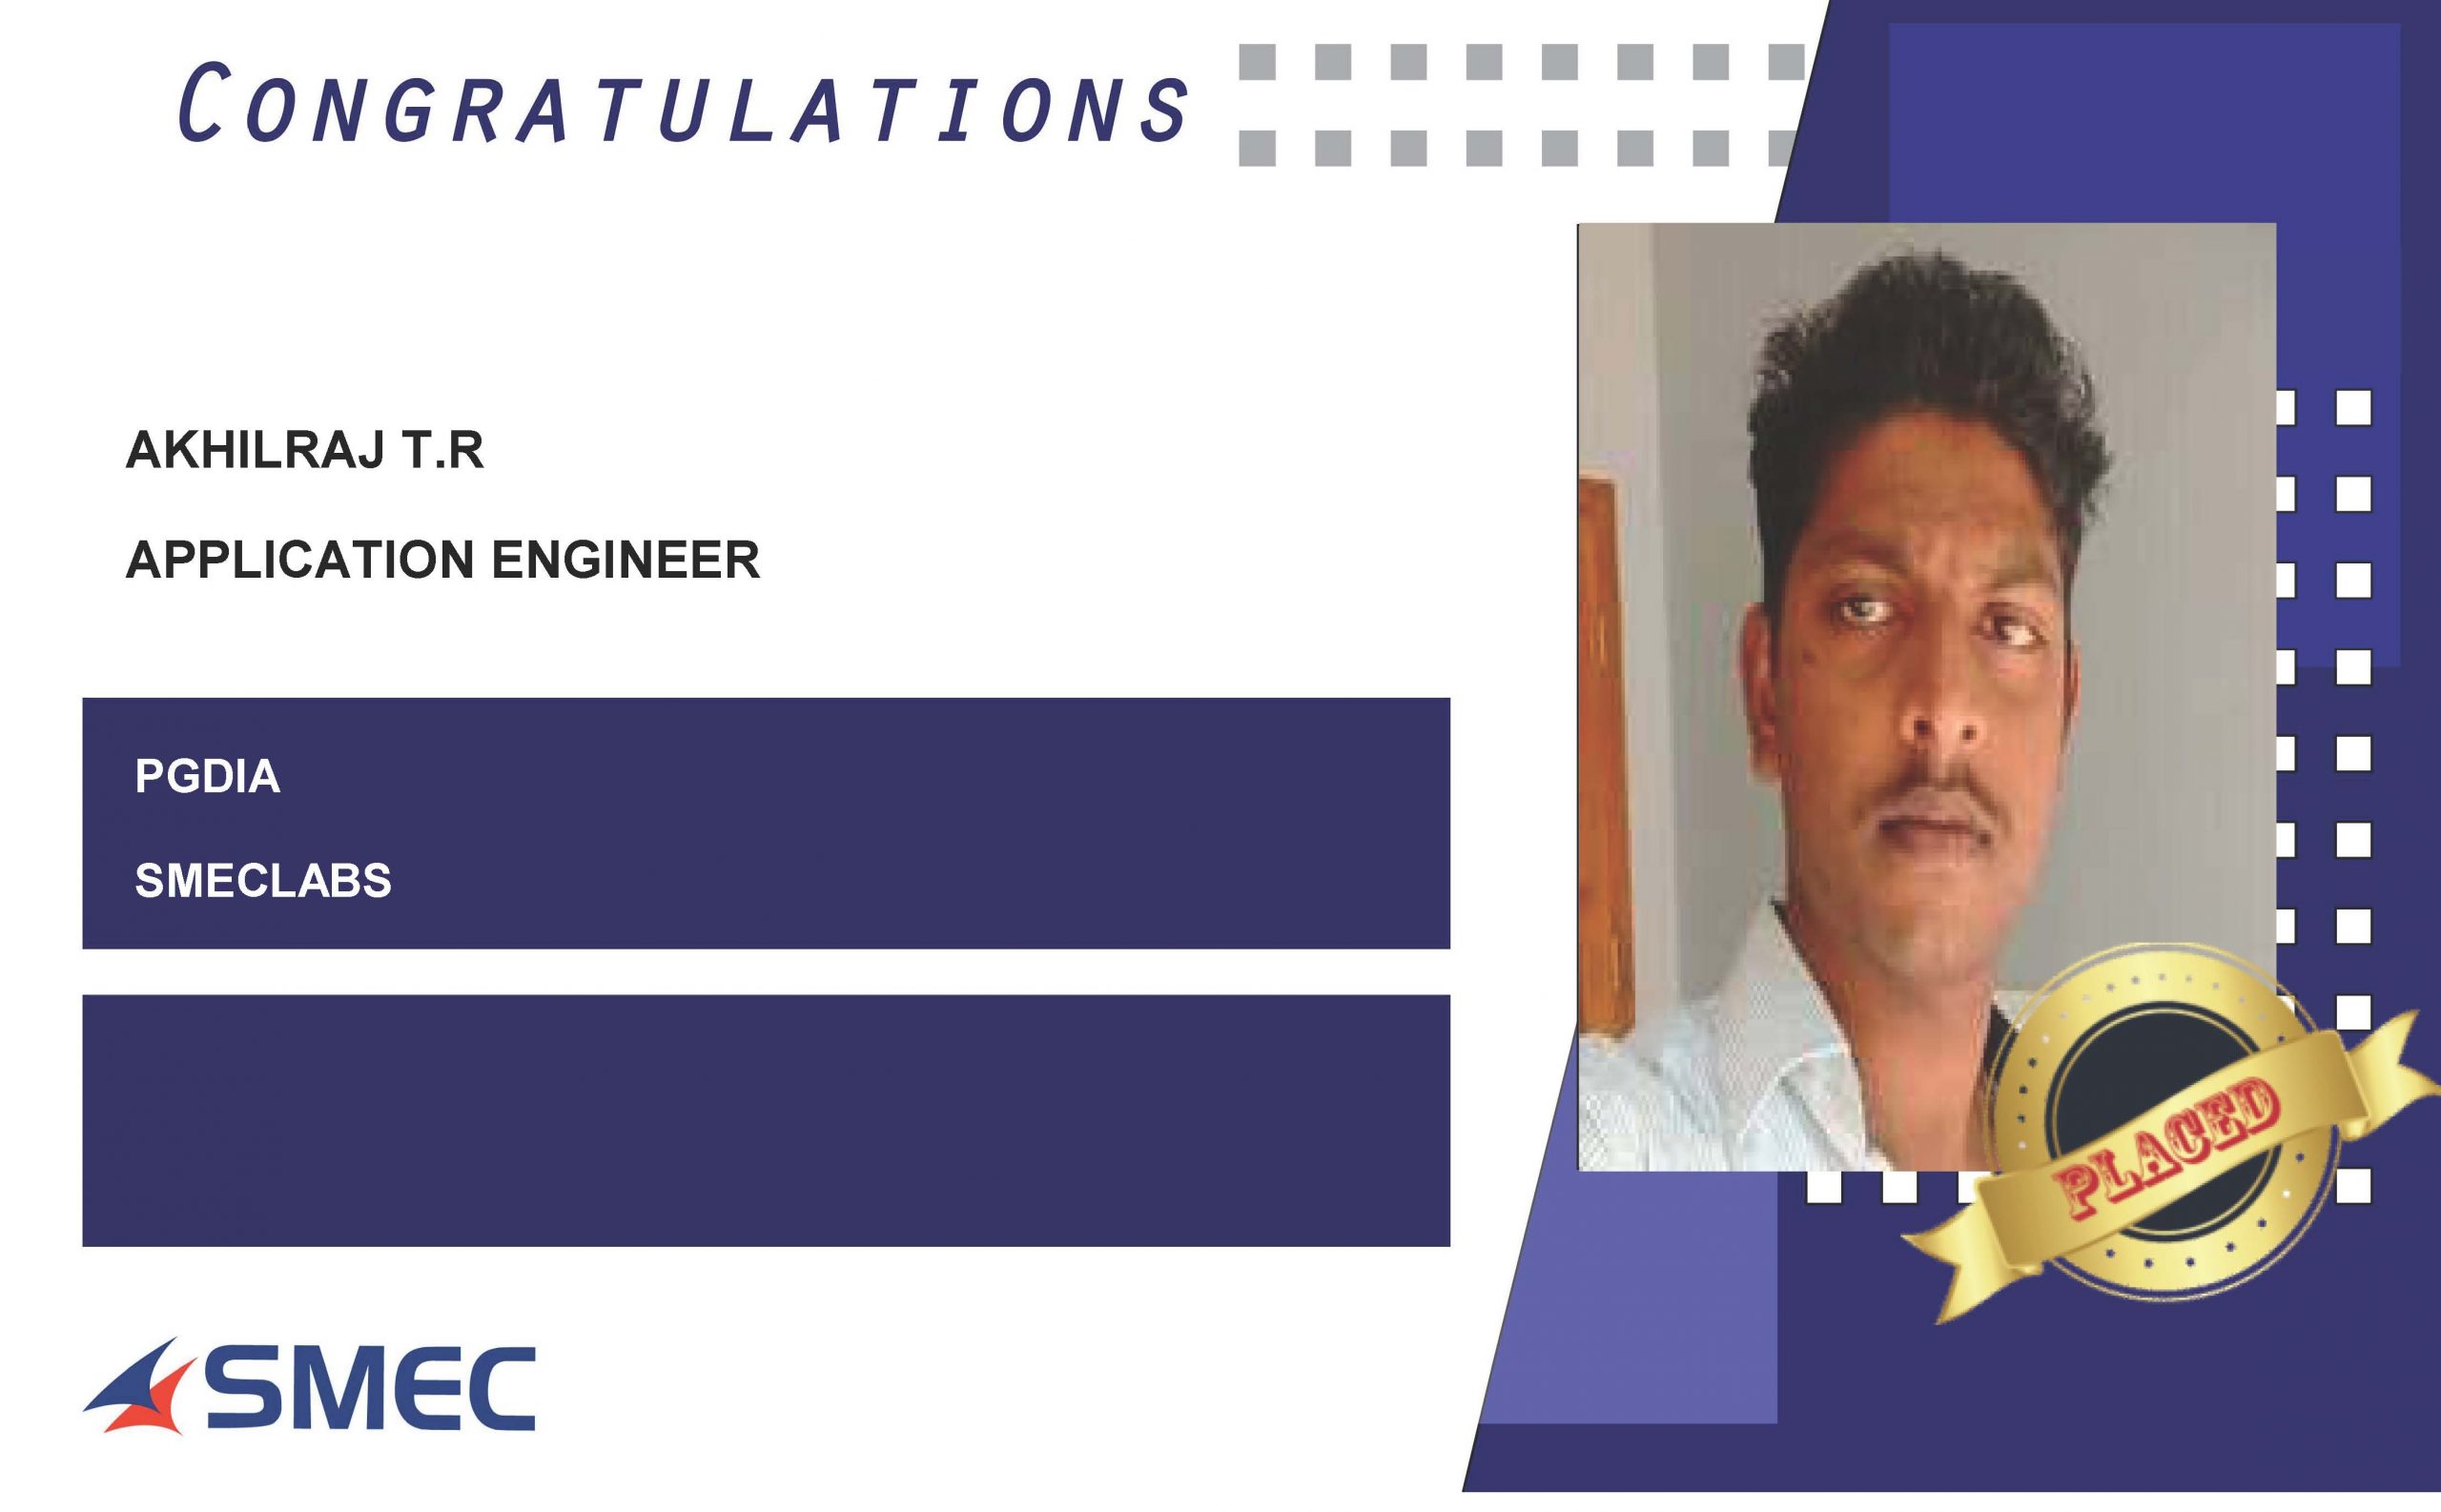 Akhilraj T R Placed Successfully as Application Engineer